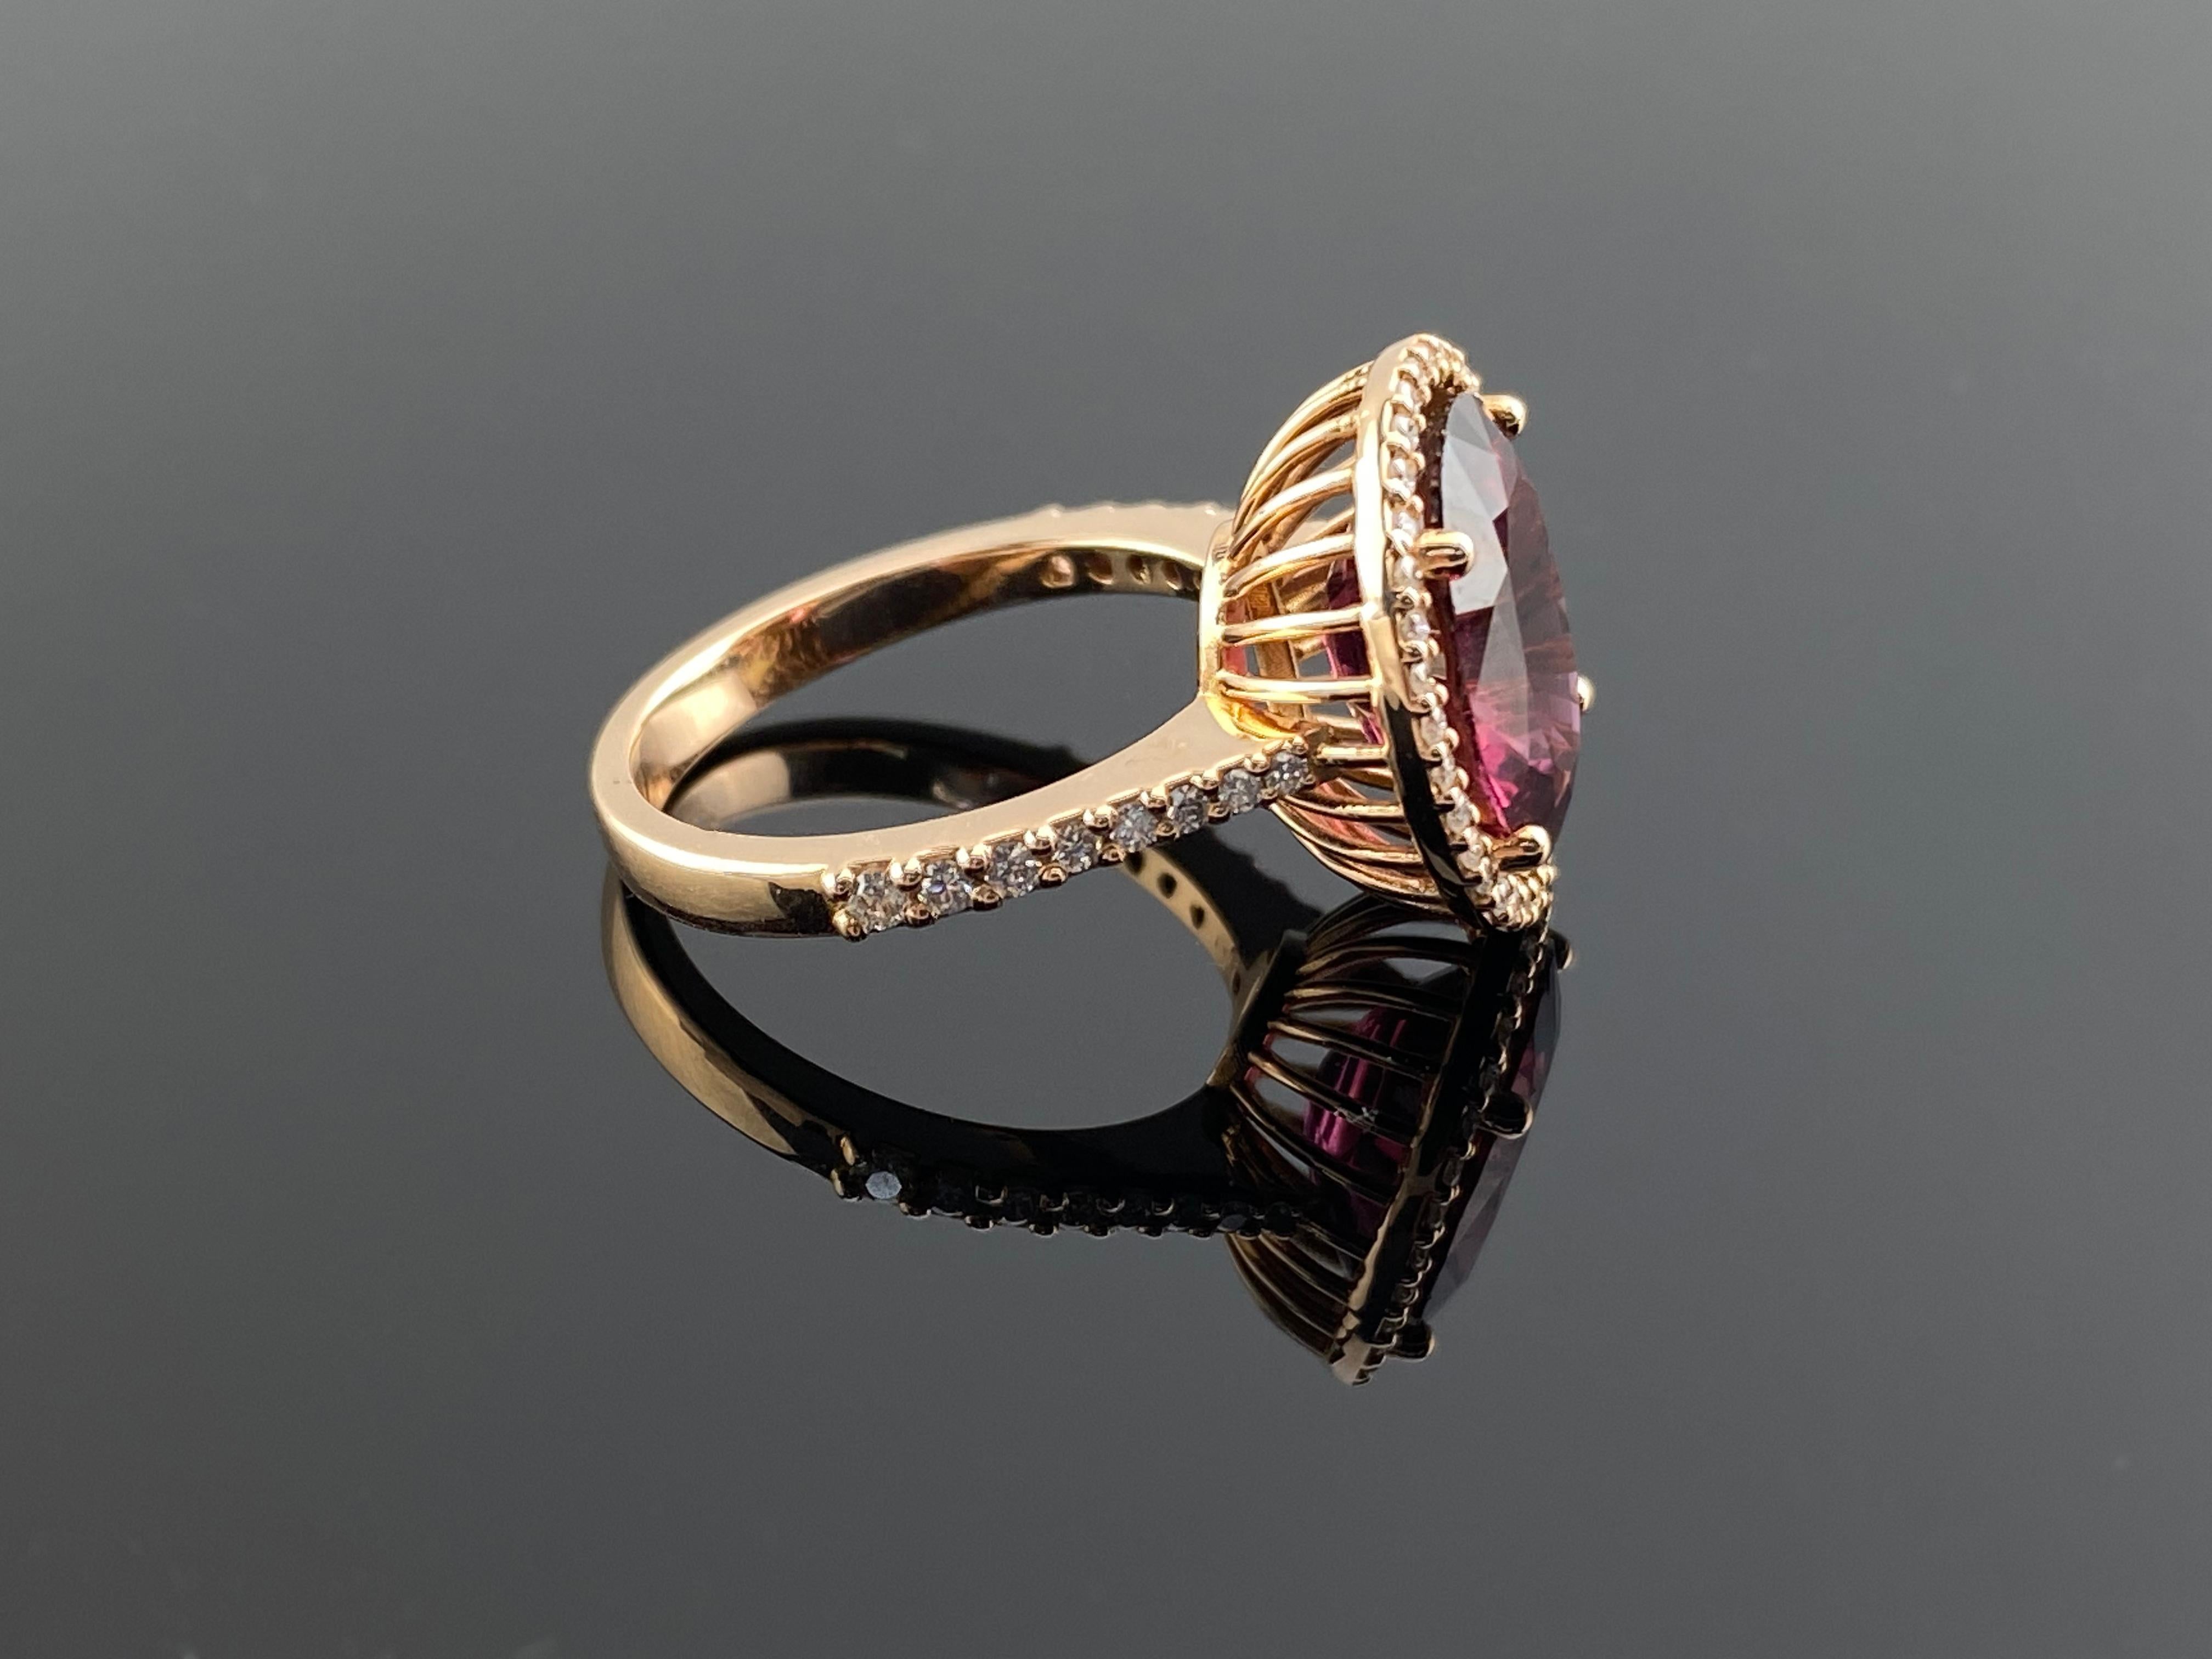 Modern Certified 5.03 Carat Rubellite Tourmaline and Diamond Engagement Ring For Sale